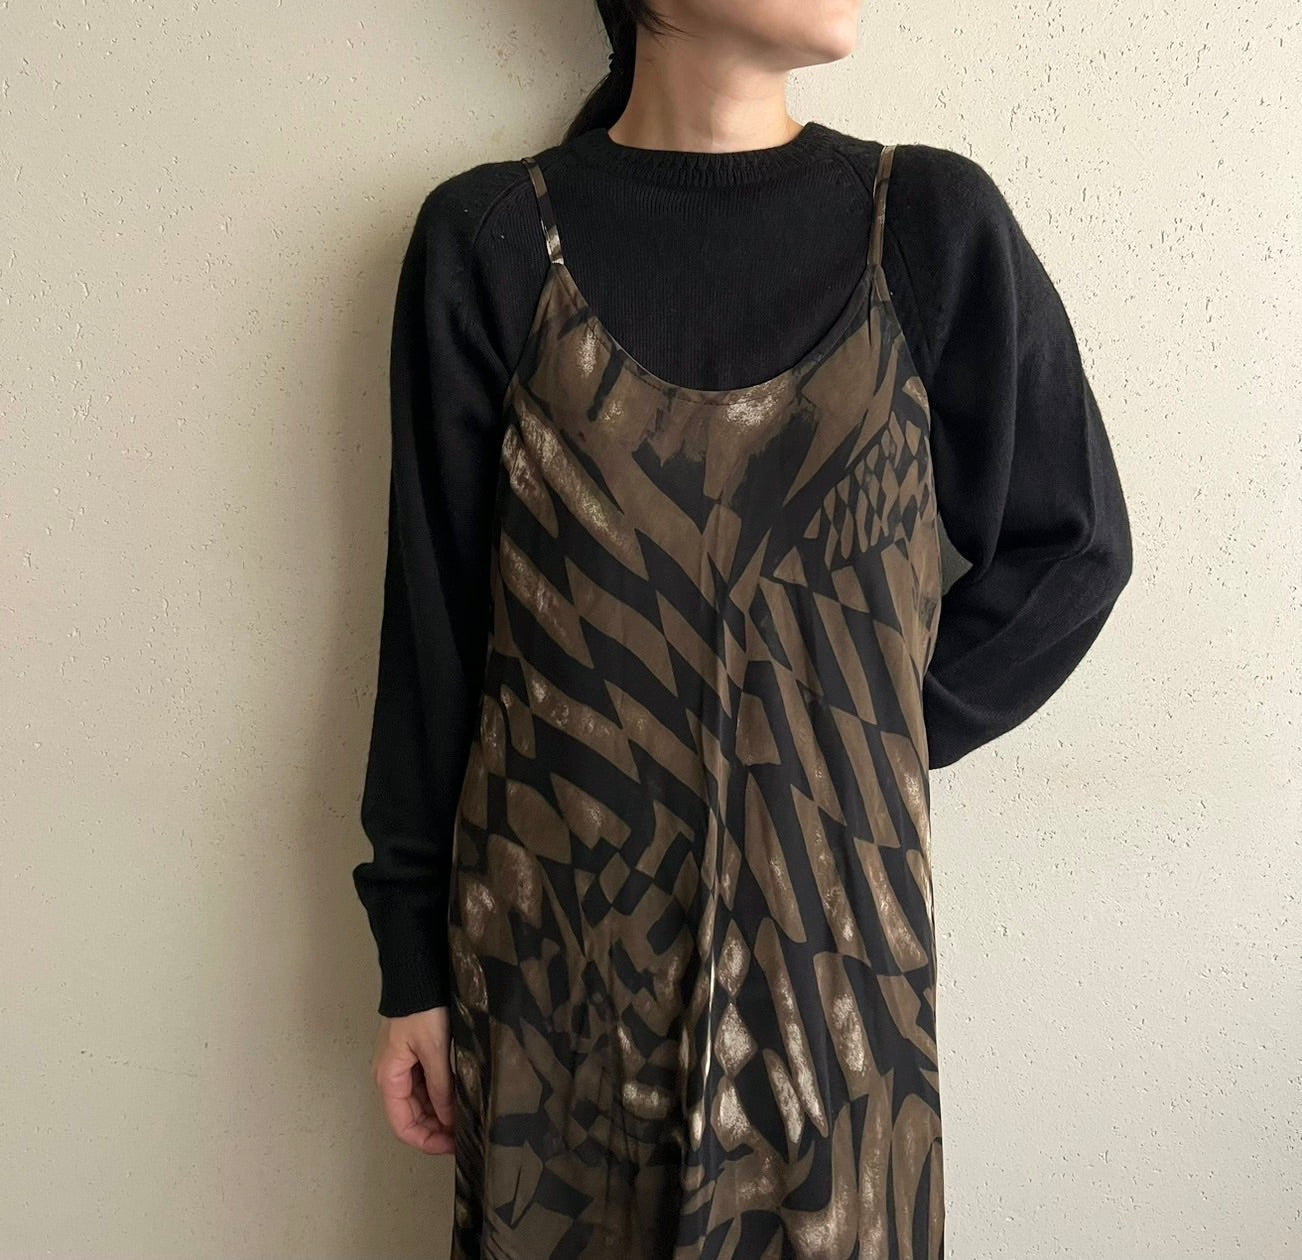 90s Print Dress Made in Italy